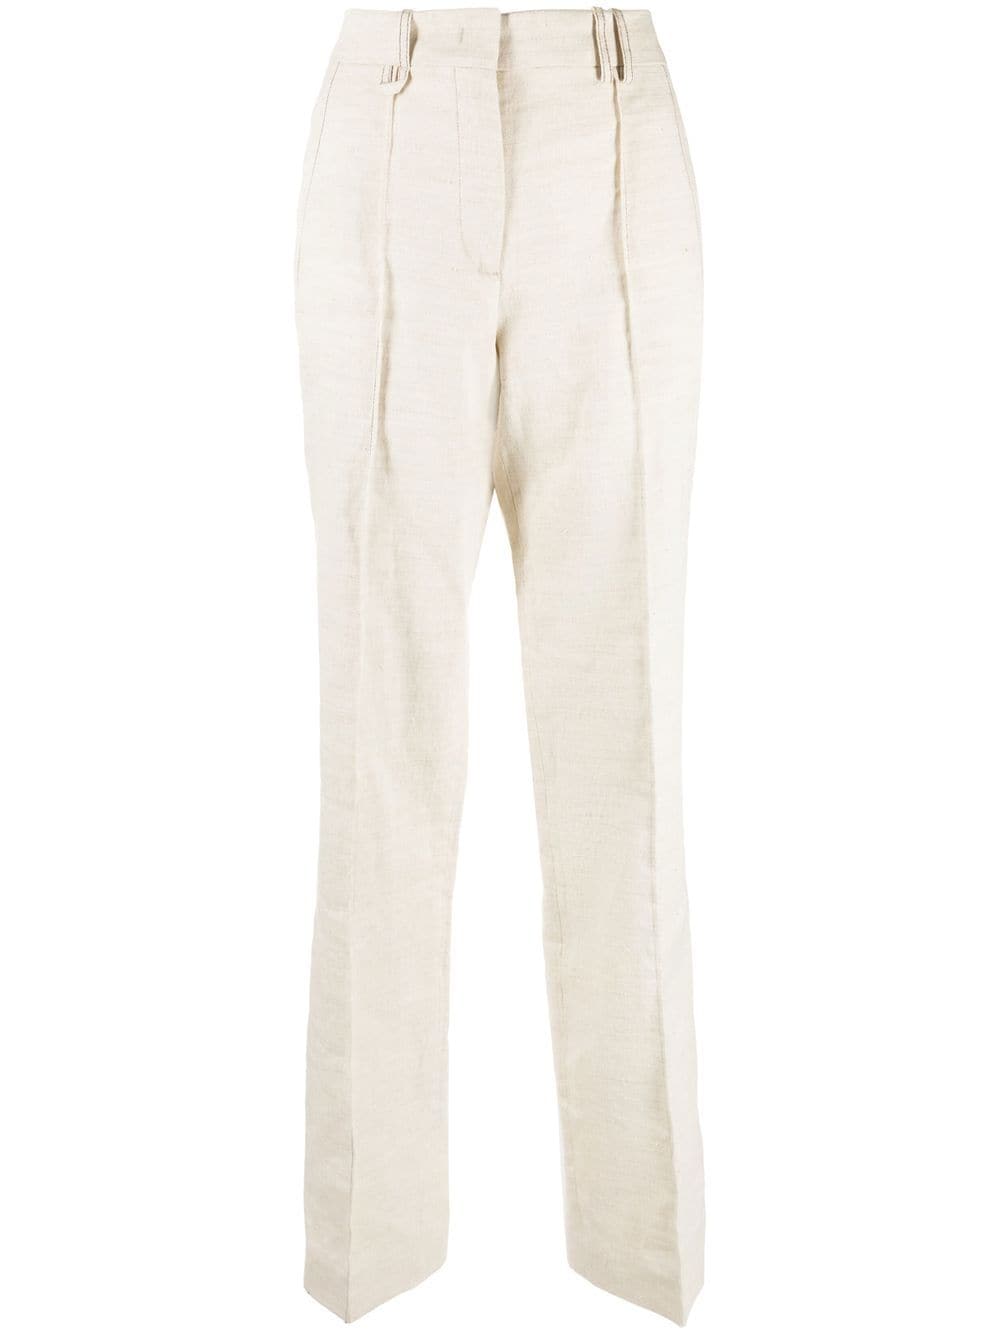 Image 1 of Jacquemus high-waisted tailored trousers